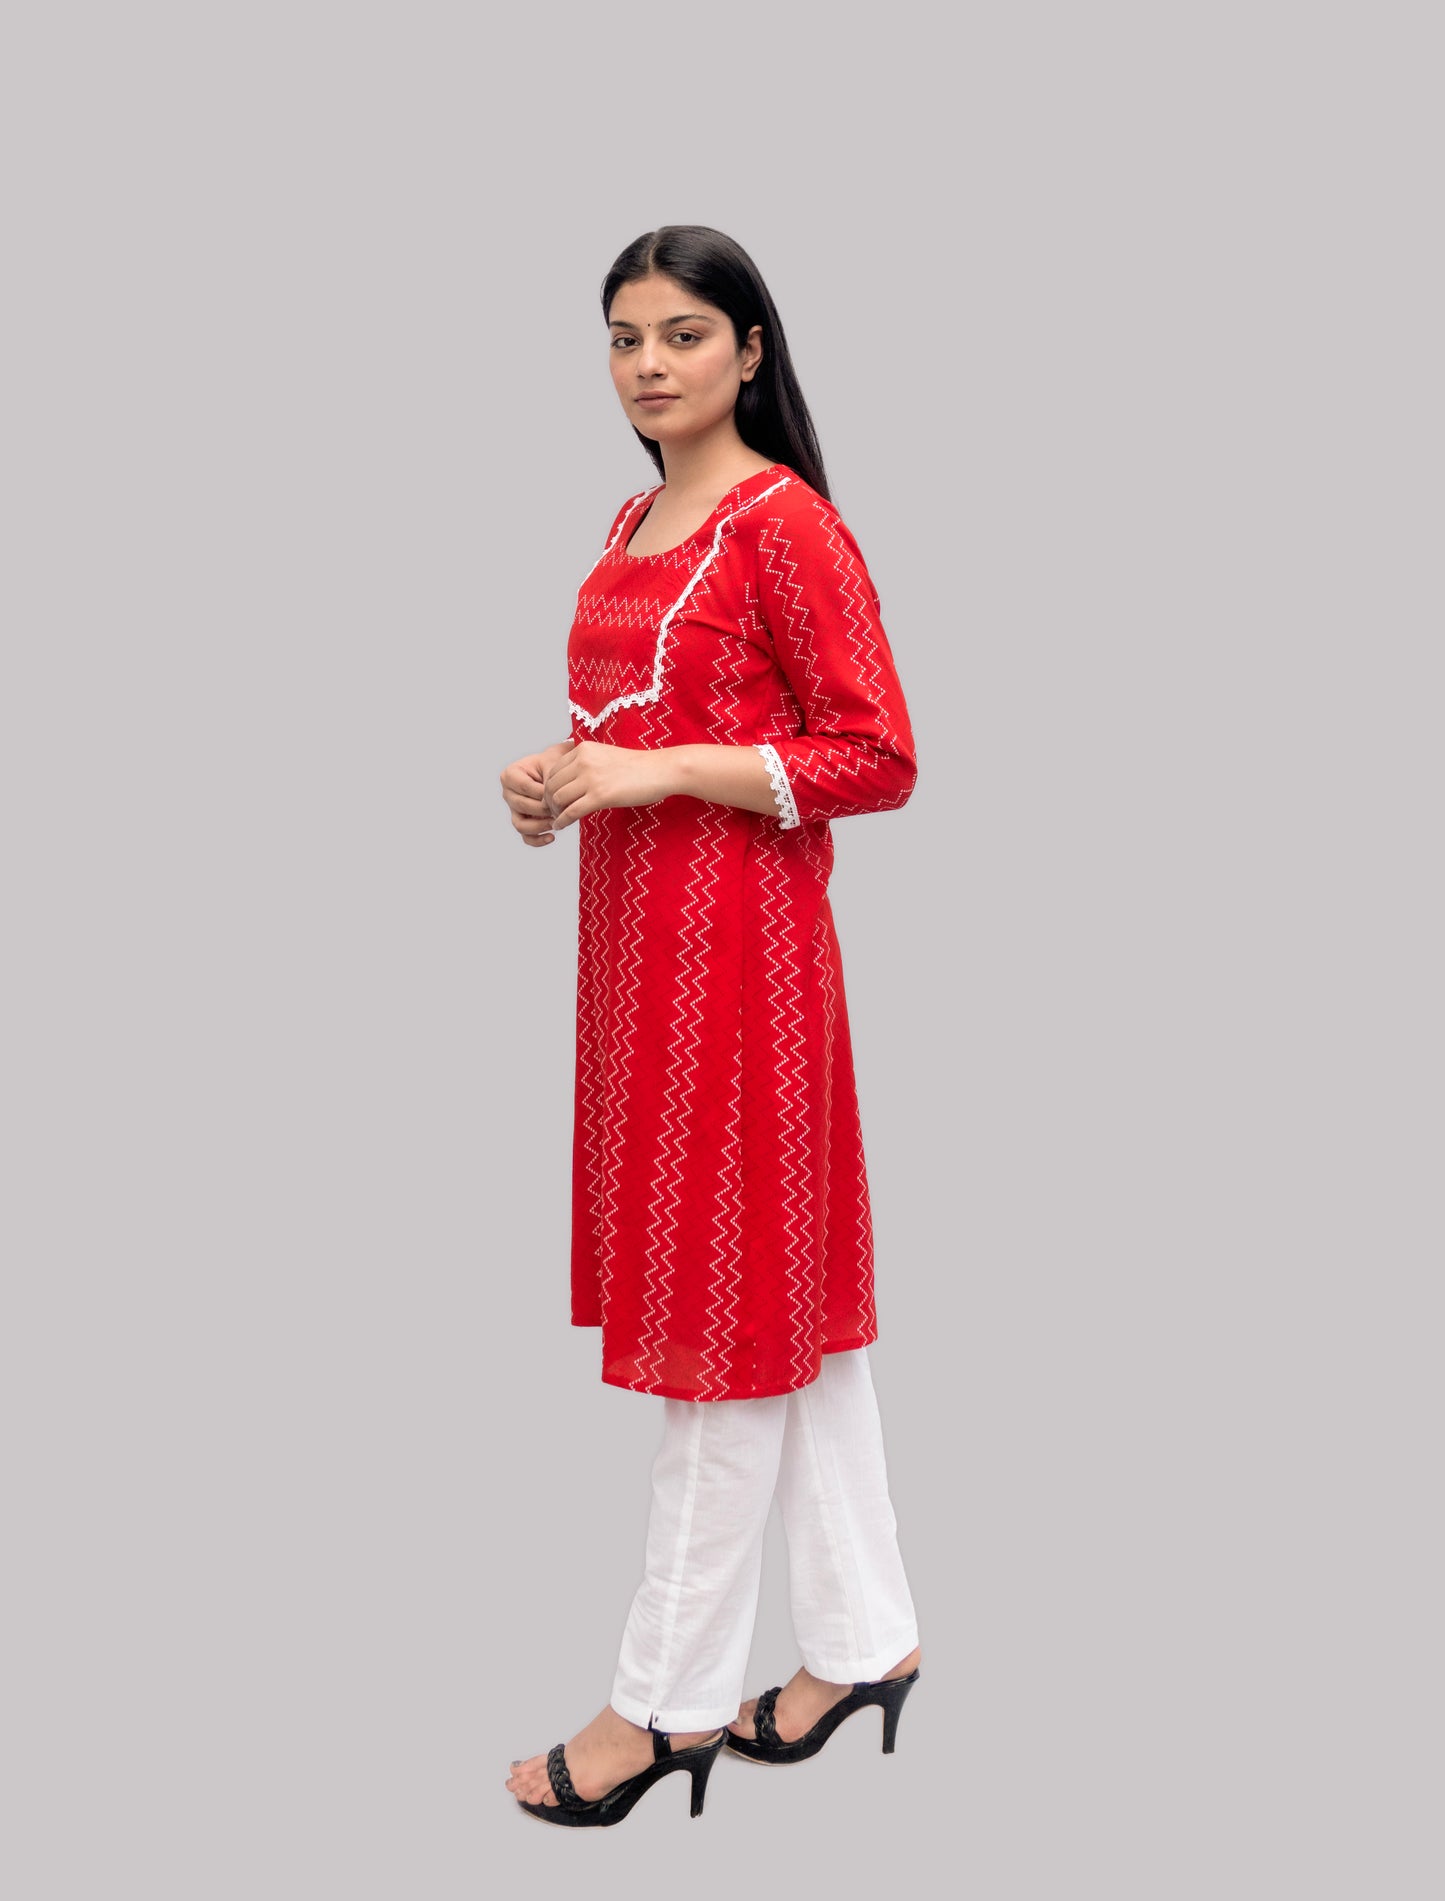 Red Cotton Suit with White Palazzo: Chic Summer Style"